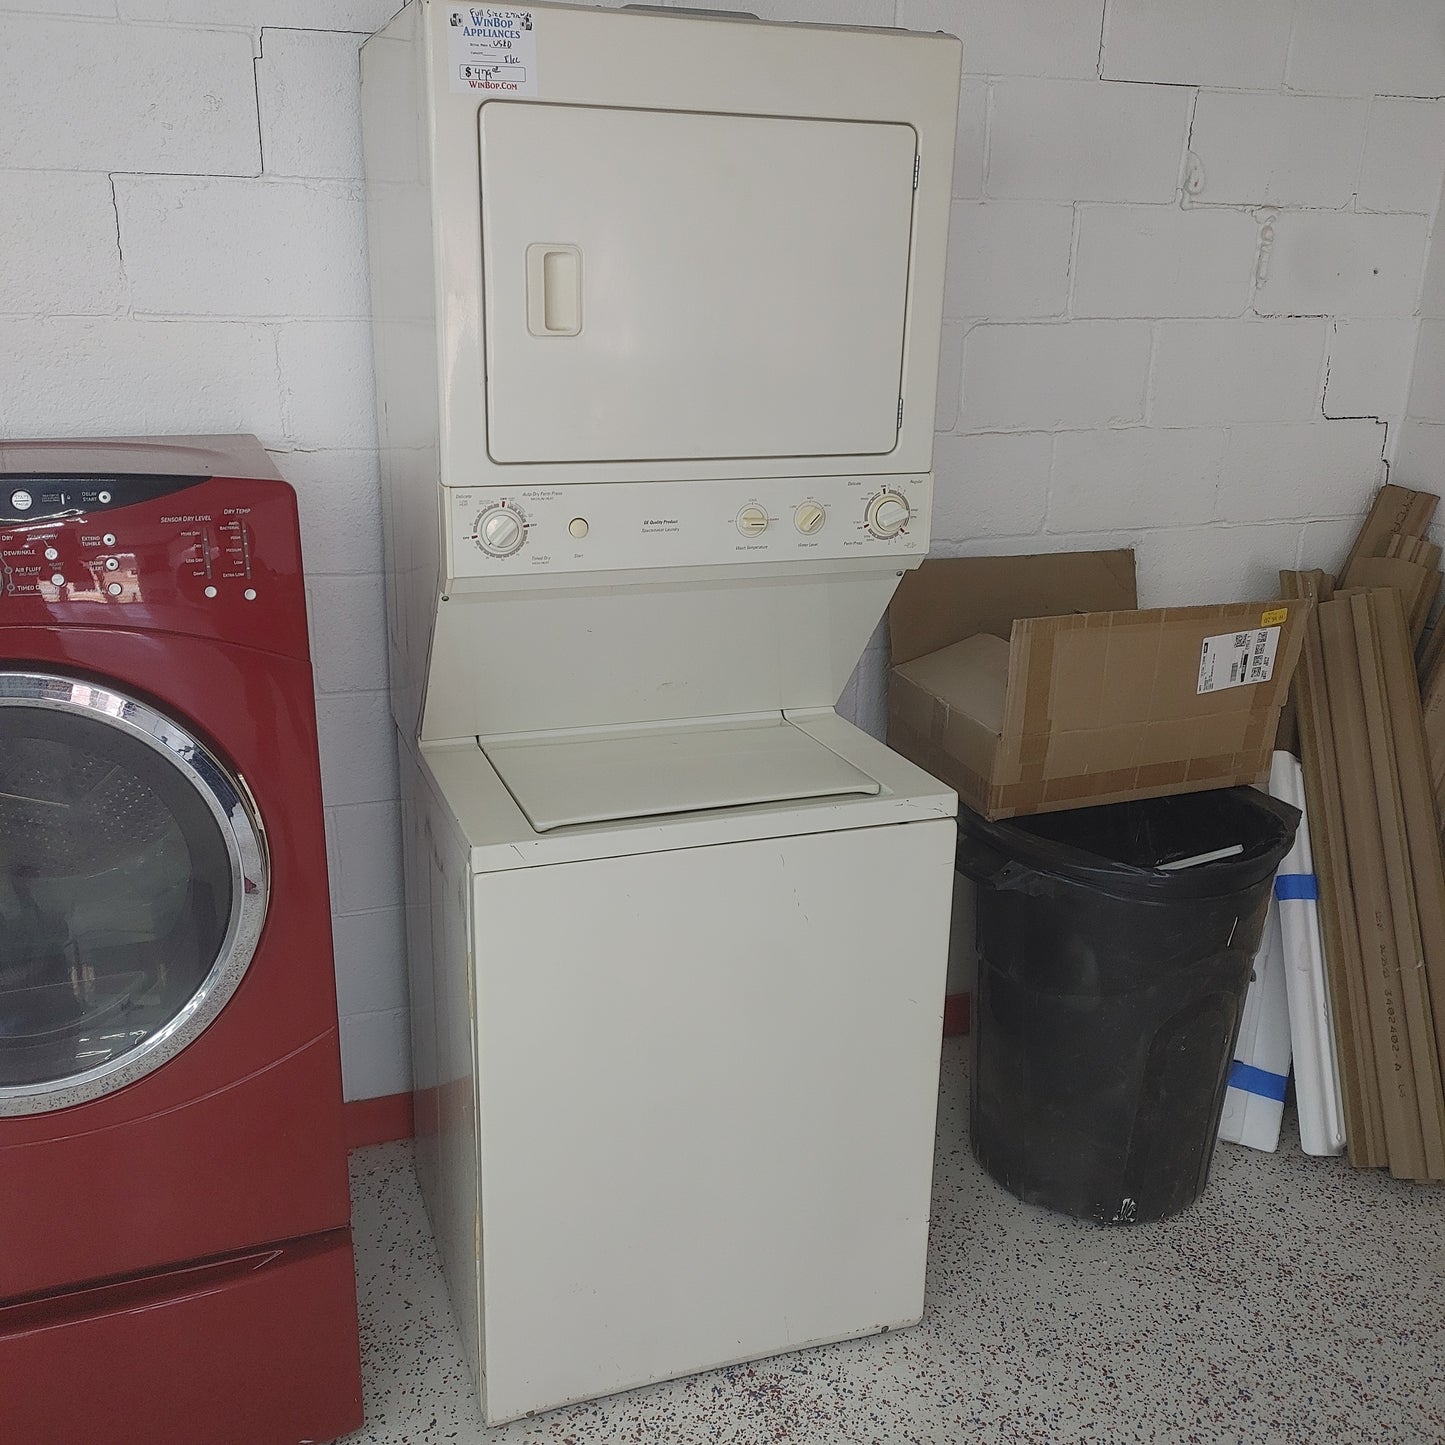 Used GE Full Size Electric Stack Washer Dryer set. 220v electric